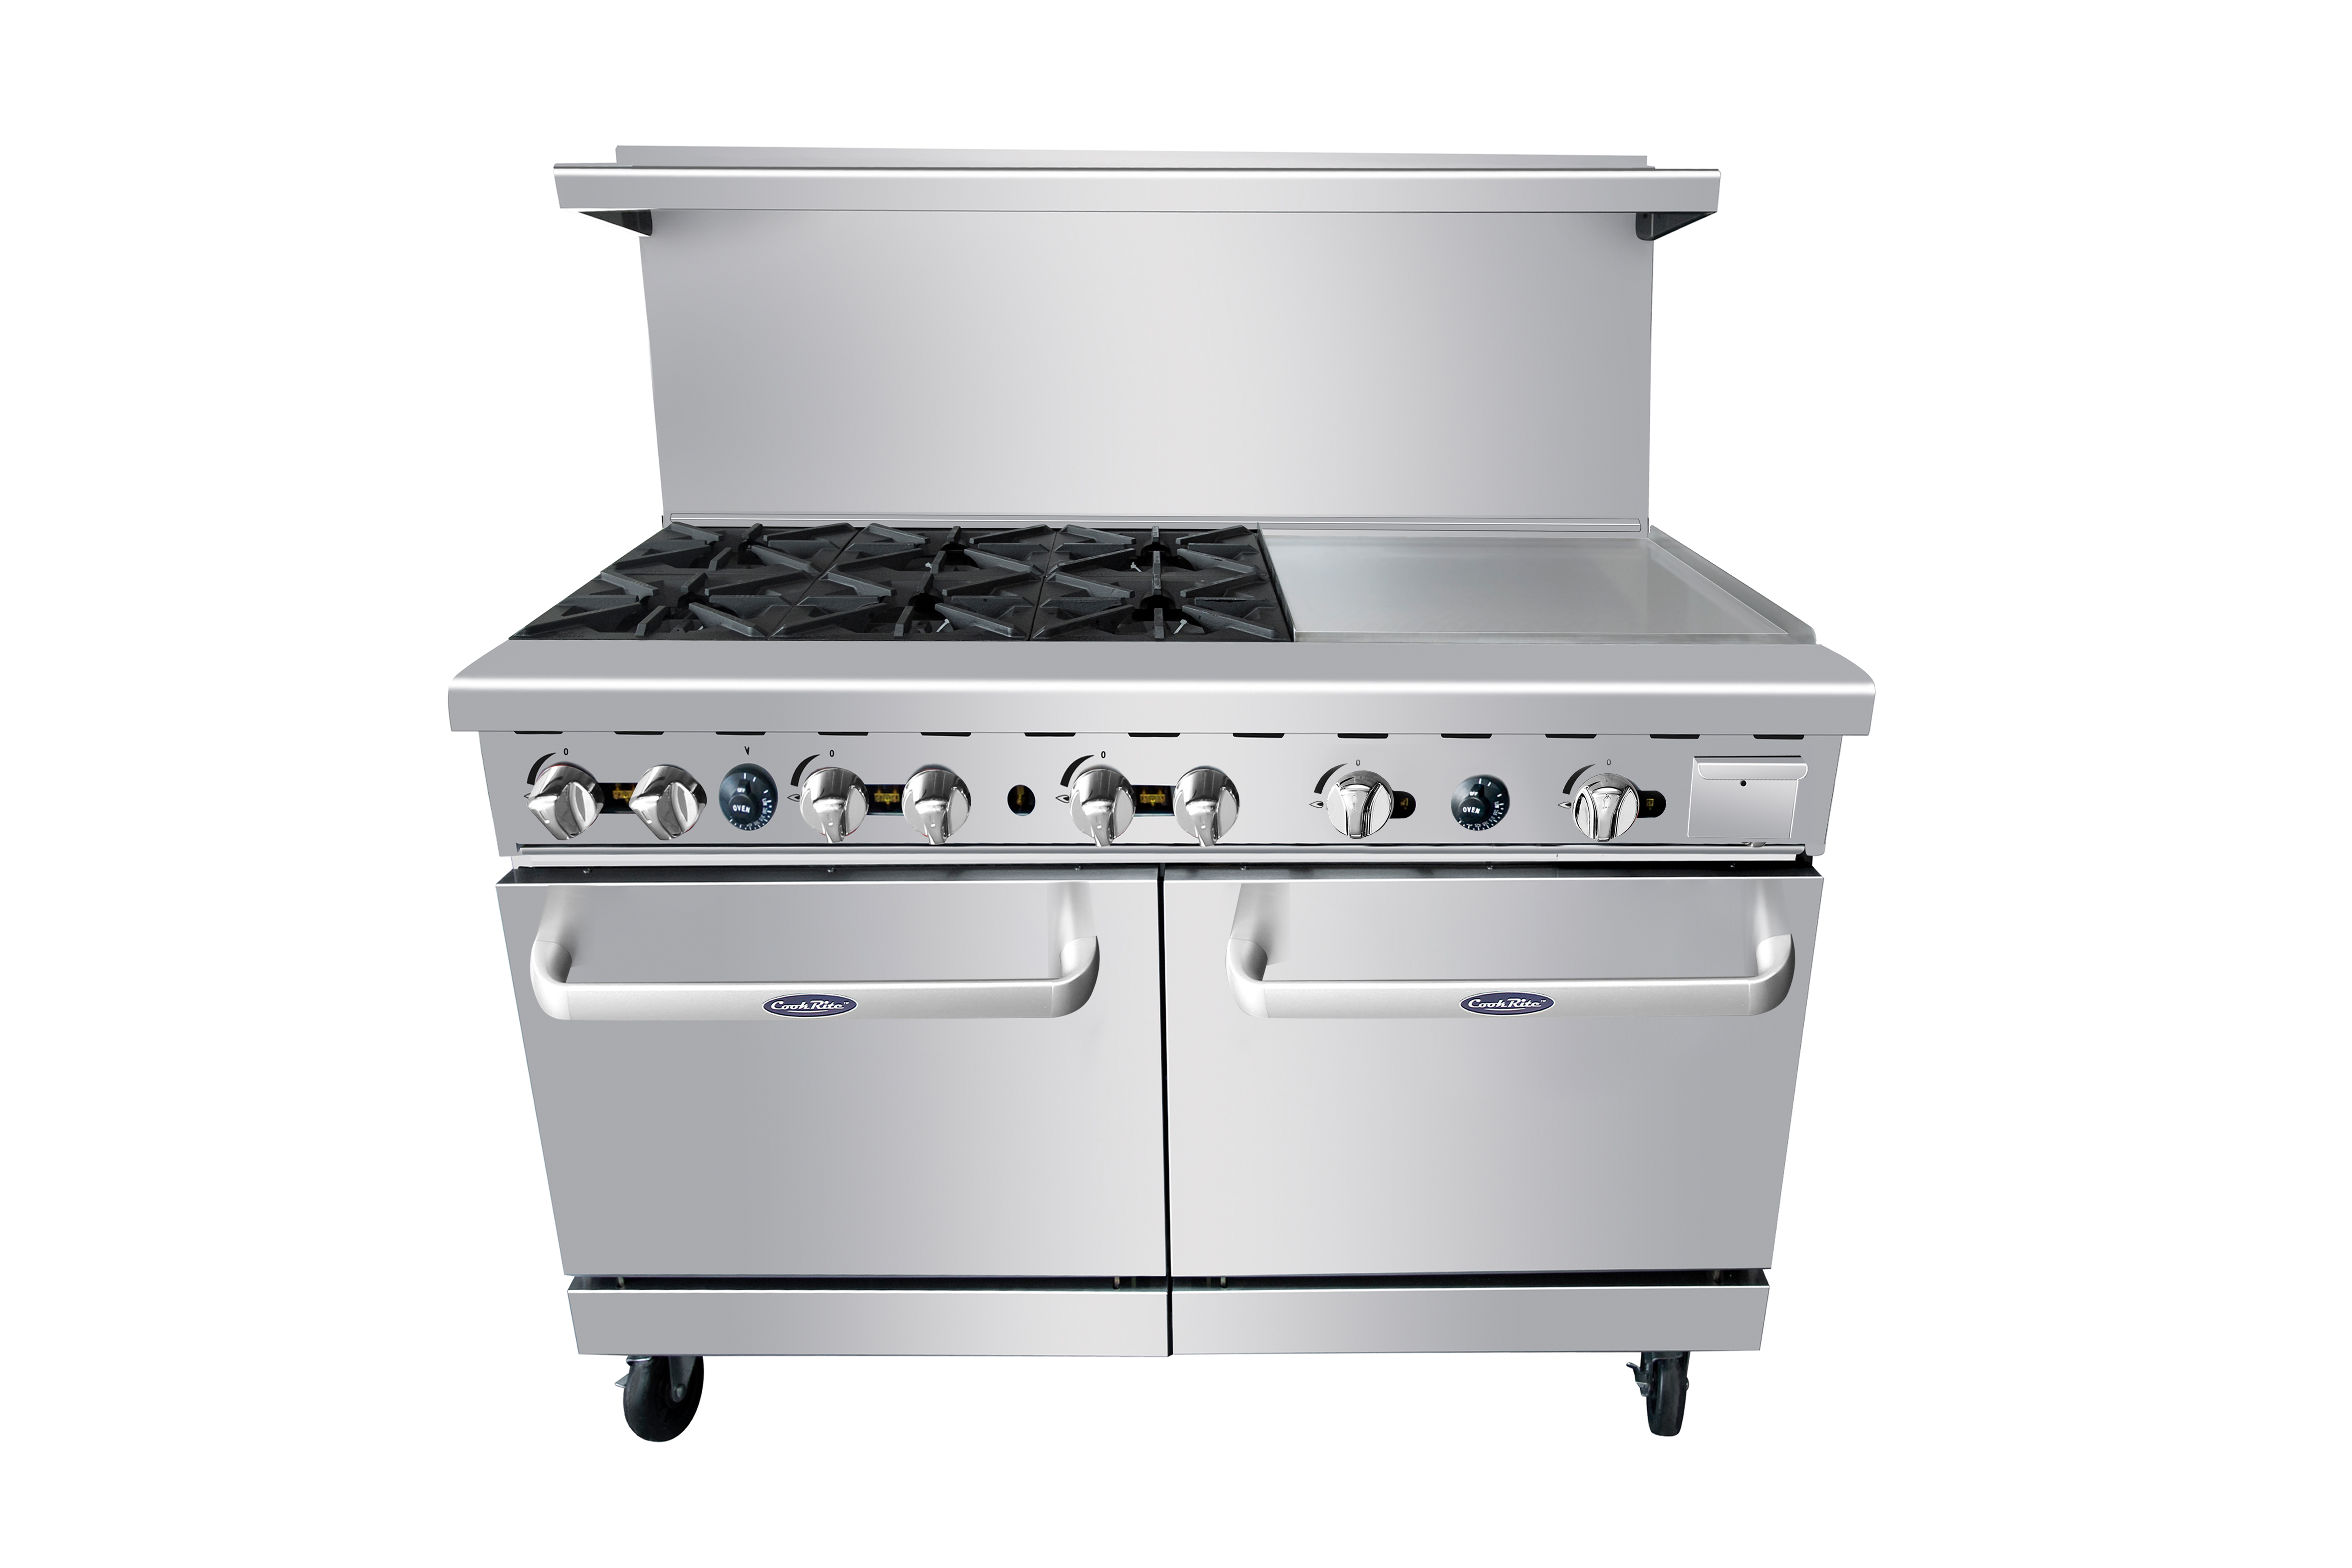 Gas Range with 6 burners and 24 griddle